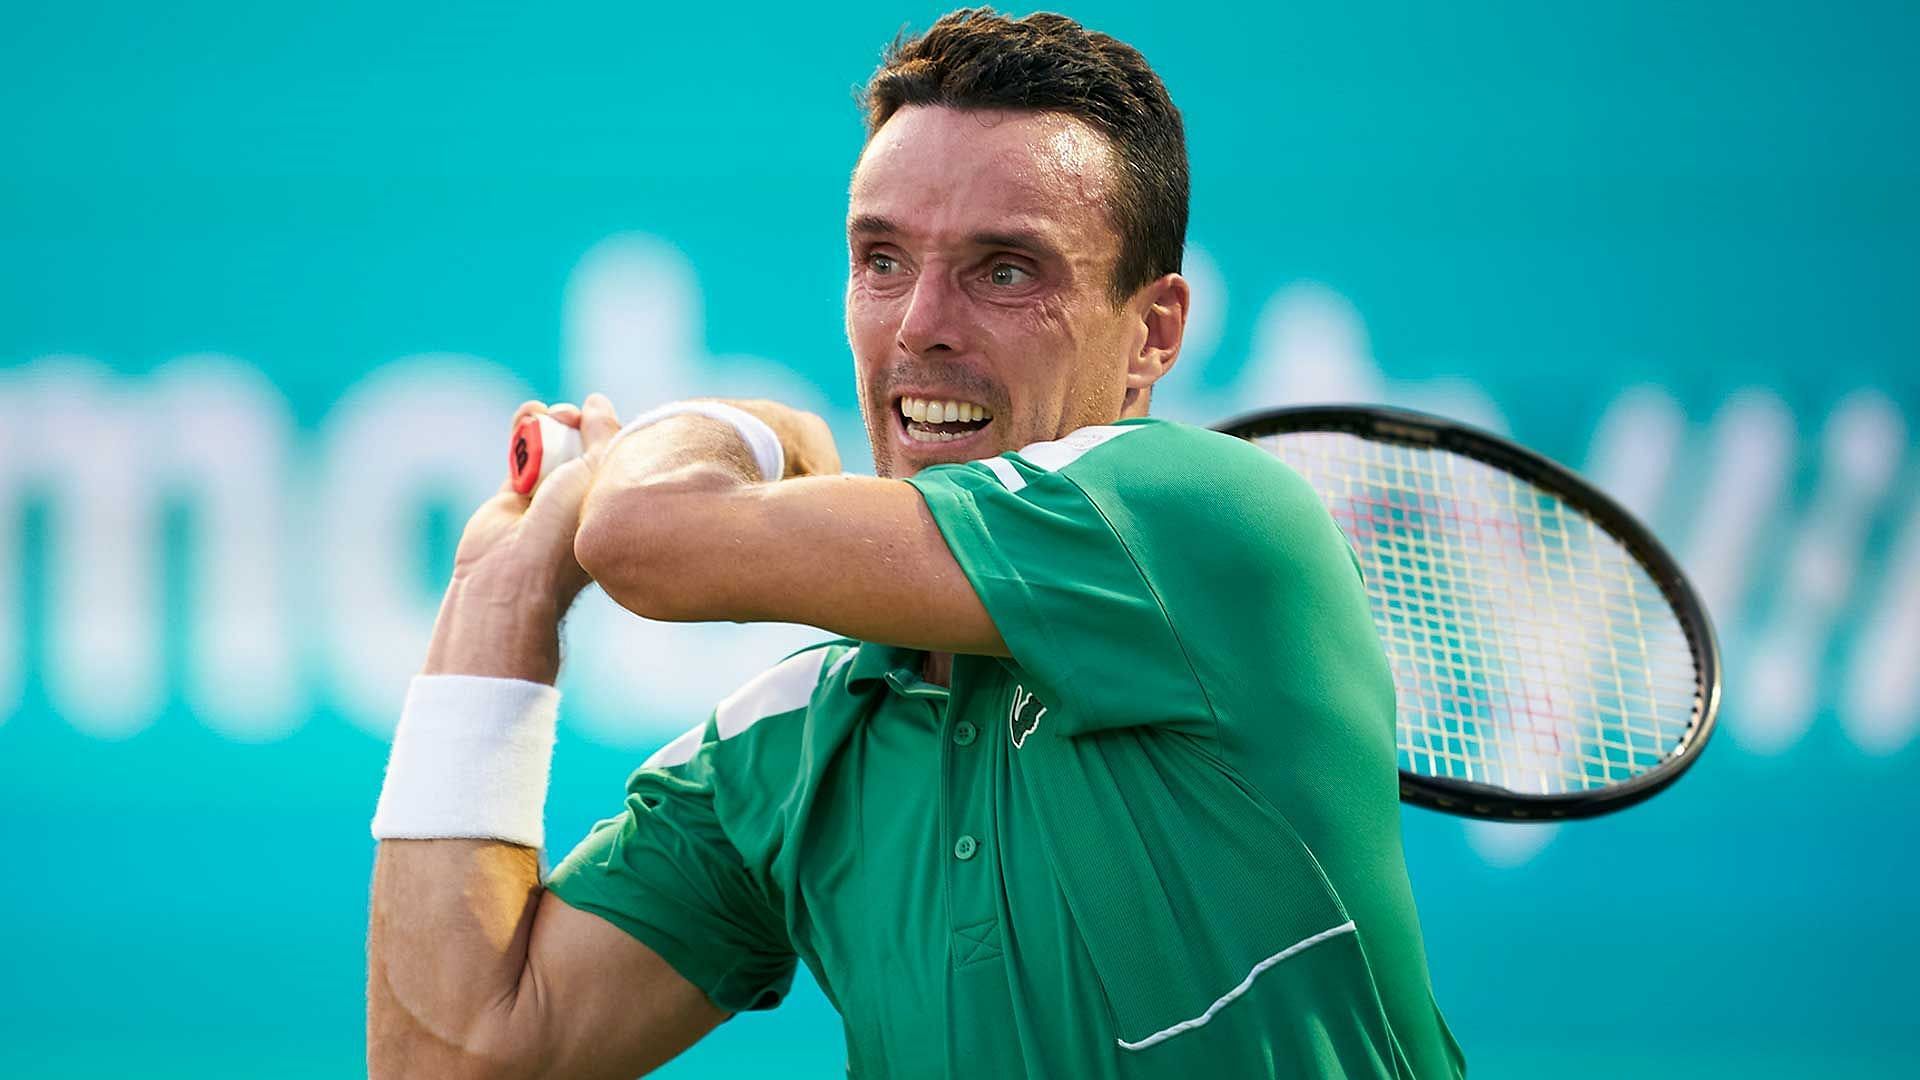 Roberto Bautista Agut showed his resilience throughout the match